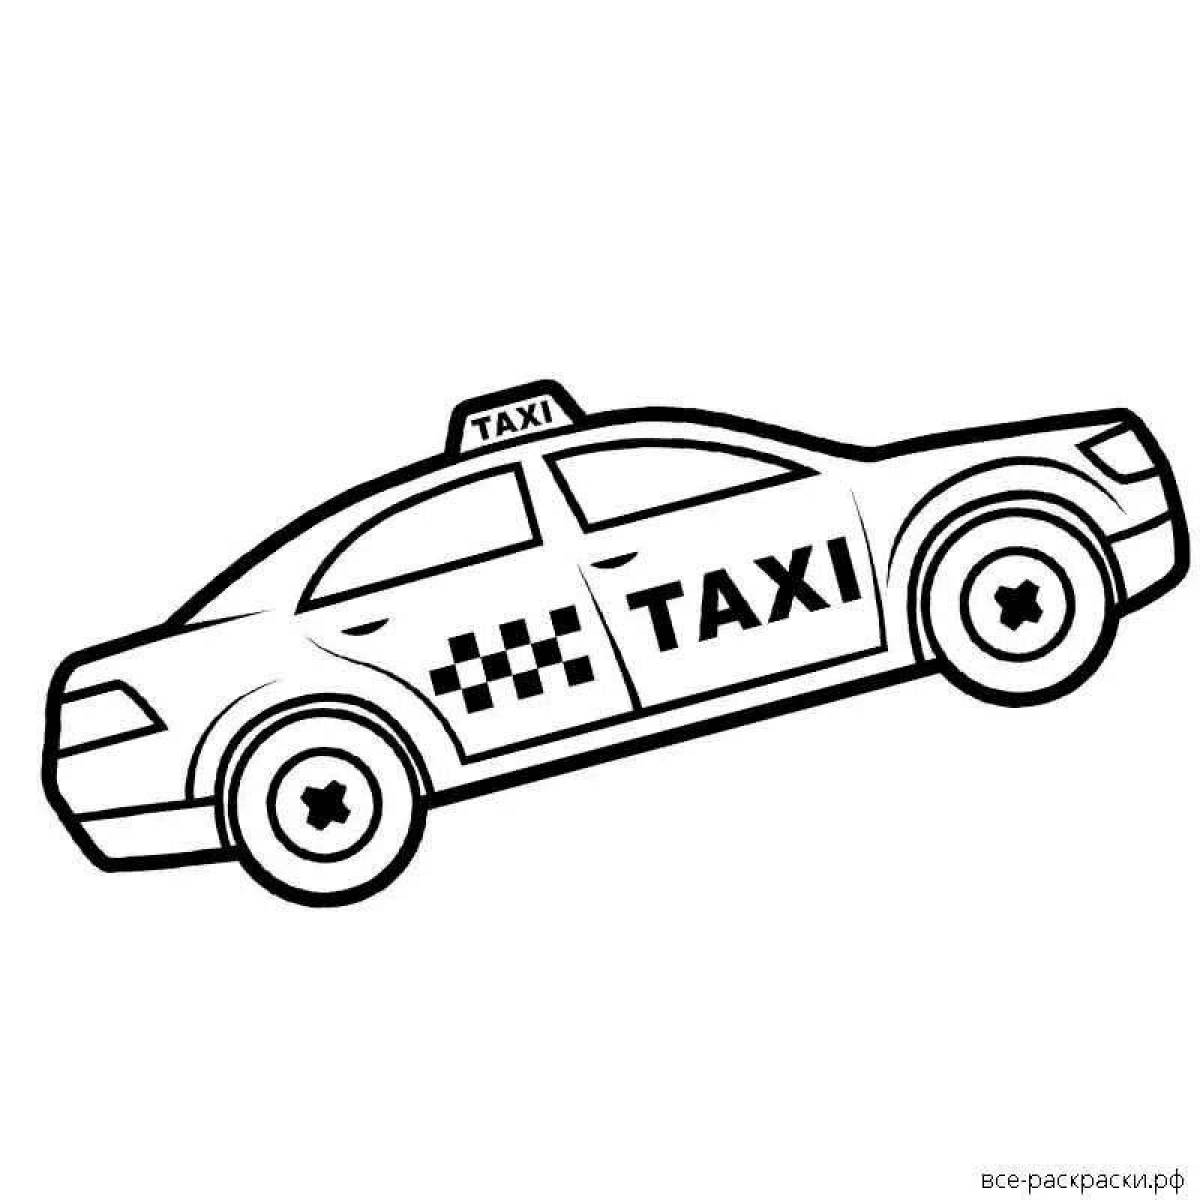 Fun taxi coloring for babies